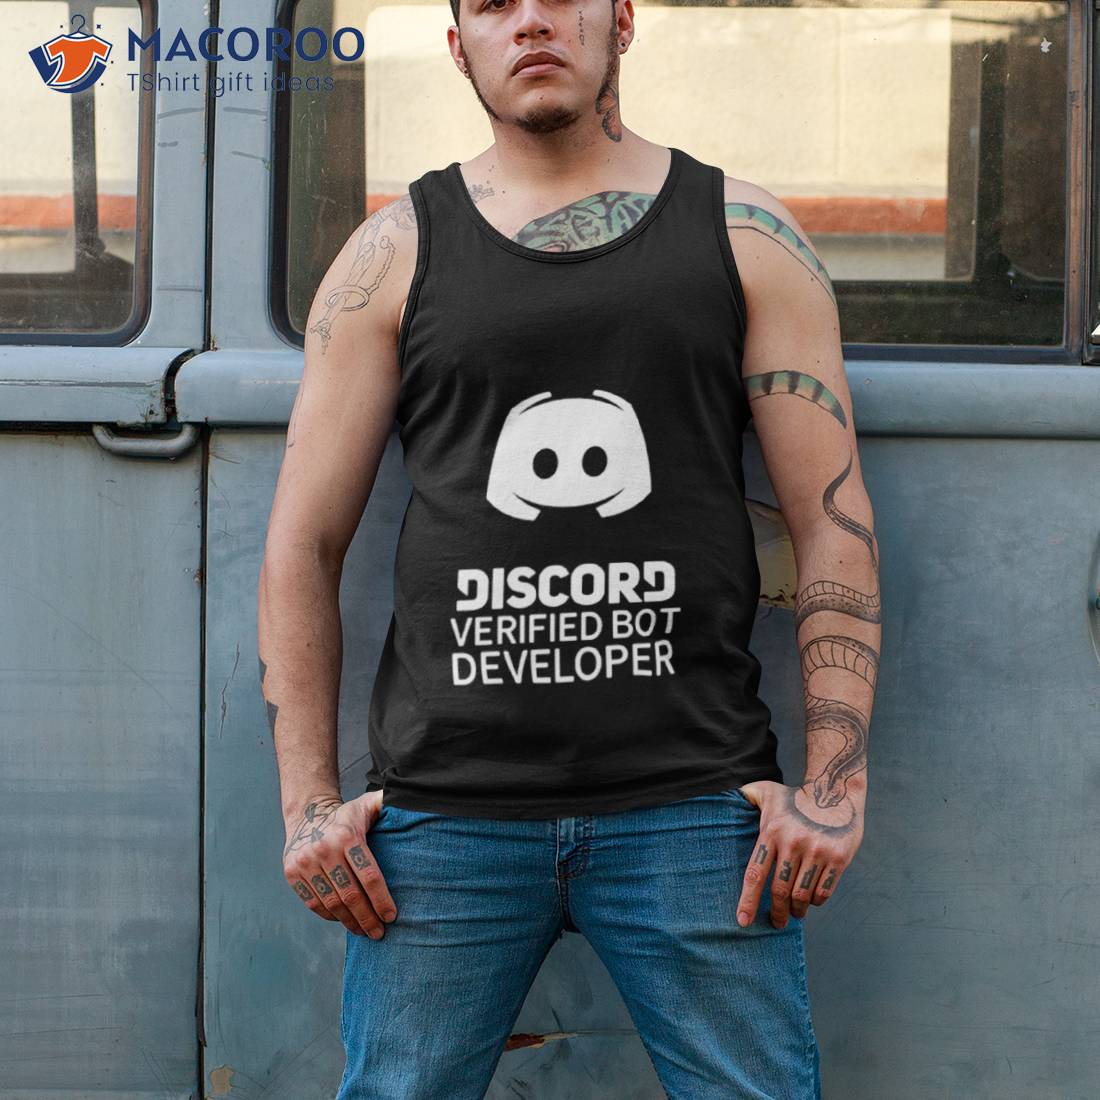 Discord T-Shirts for Sale